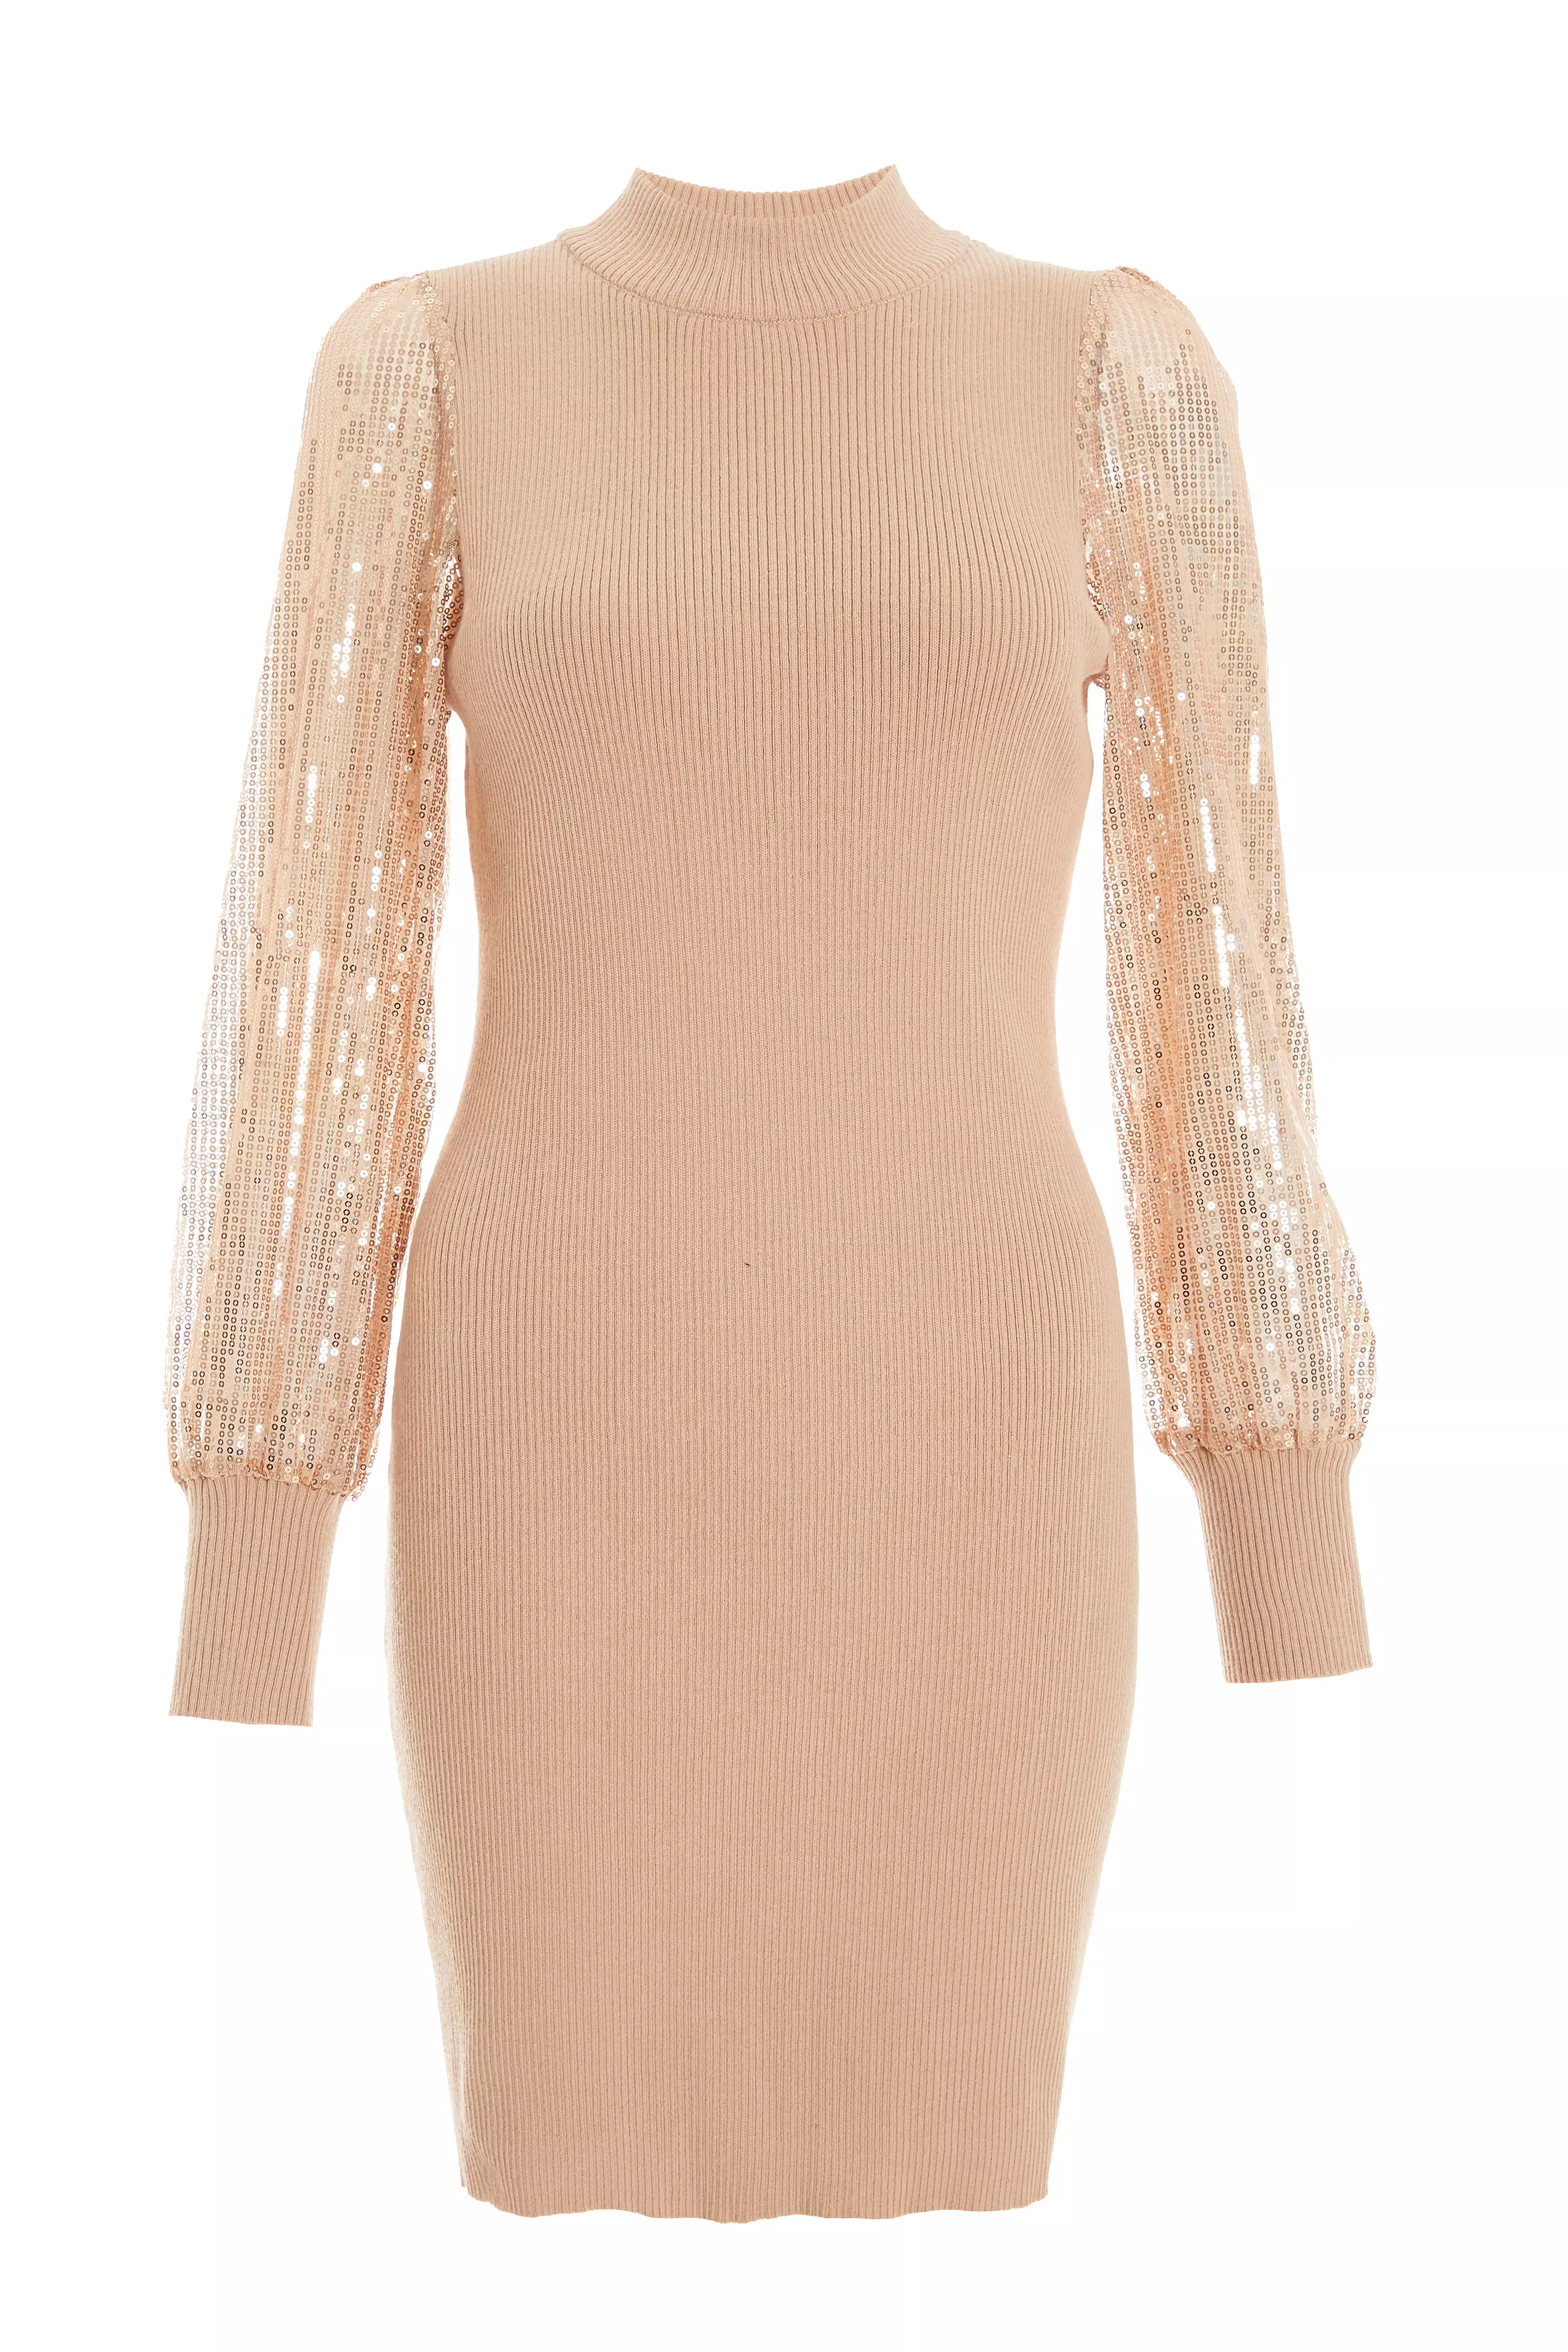 Stone Knitted Sequin Sleeve Jumper Dress